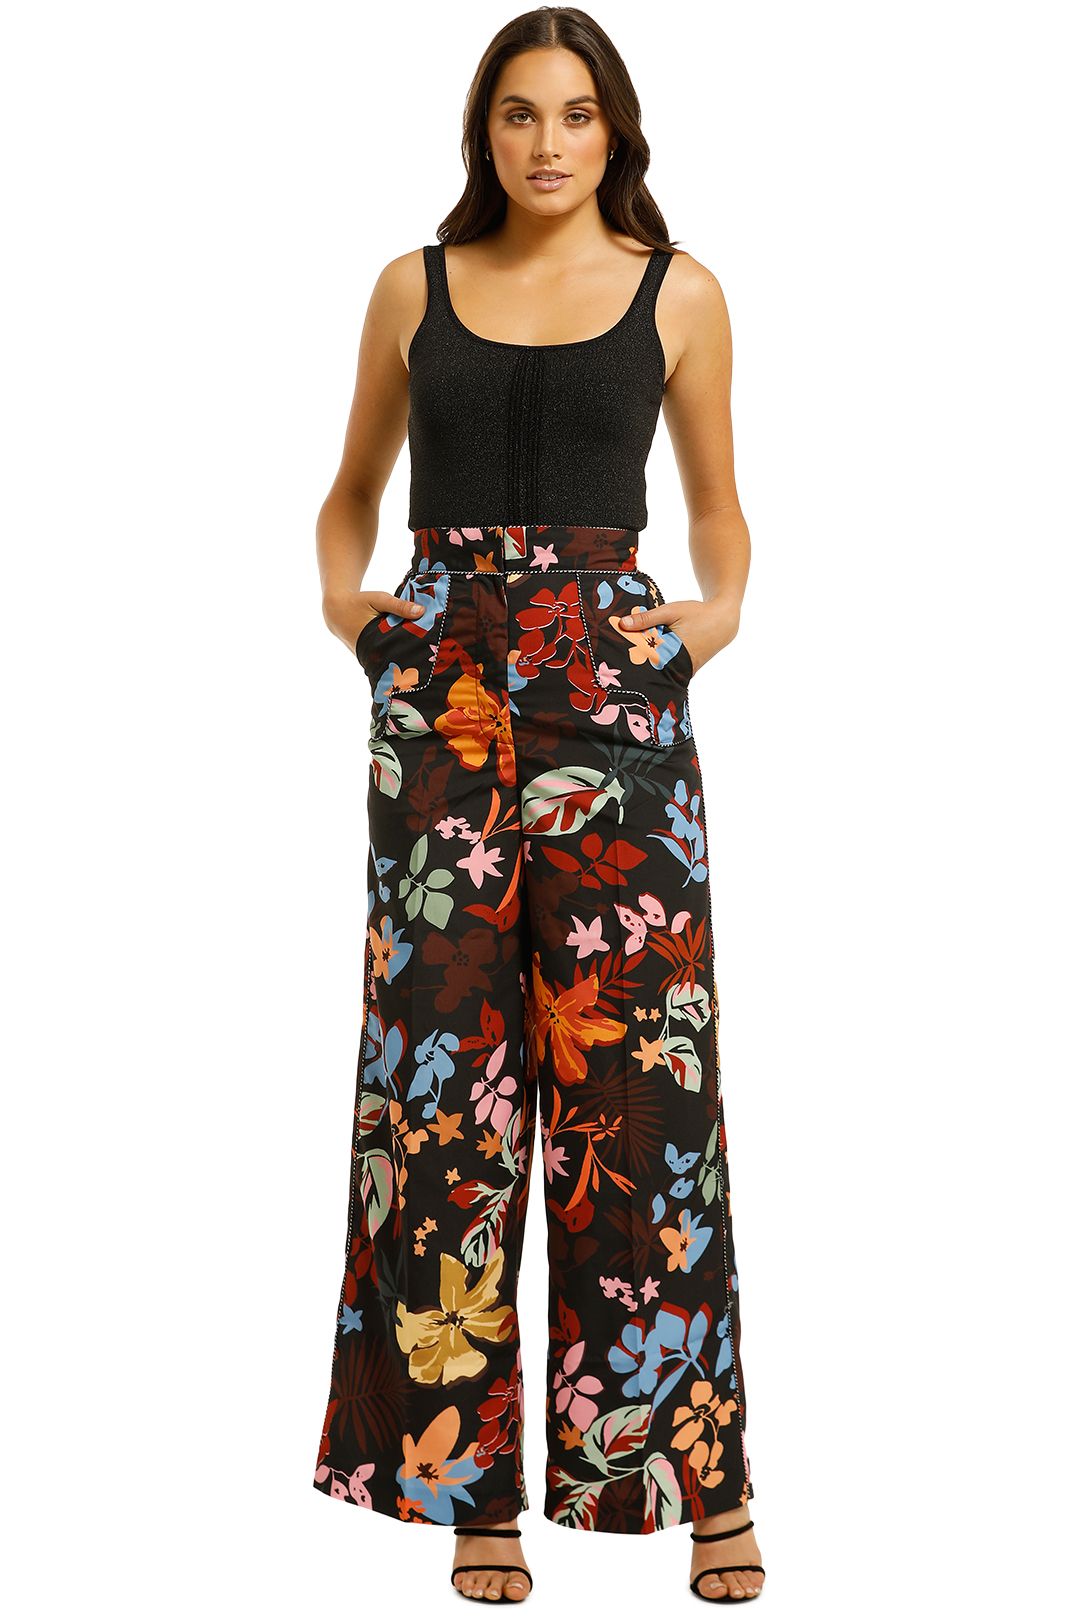 CMEO-Collective-Origin-Pant-Black-Abstract-Floral-Front